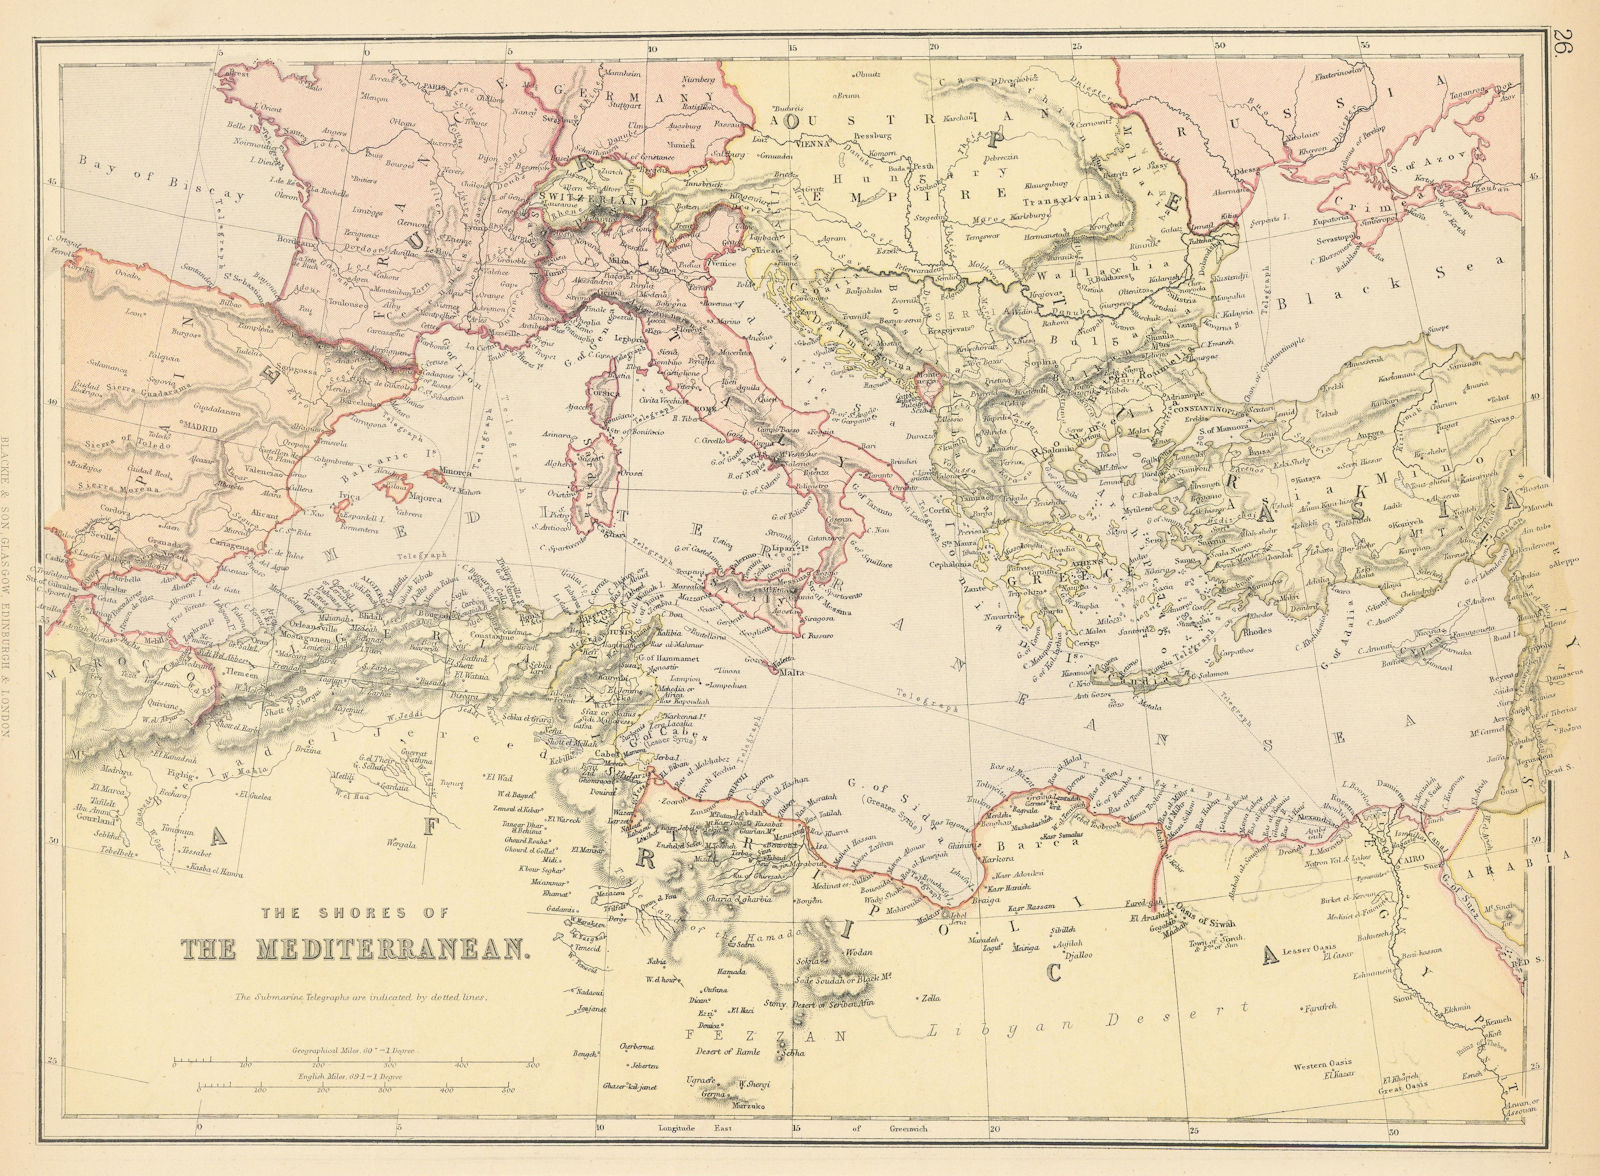 MEDITERRANEAN. Showing Telegraph cables. BLACKIE 1886 old antique map chart